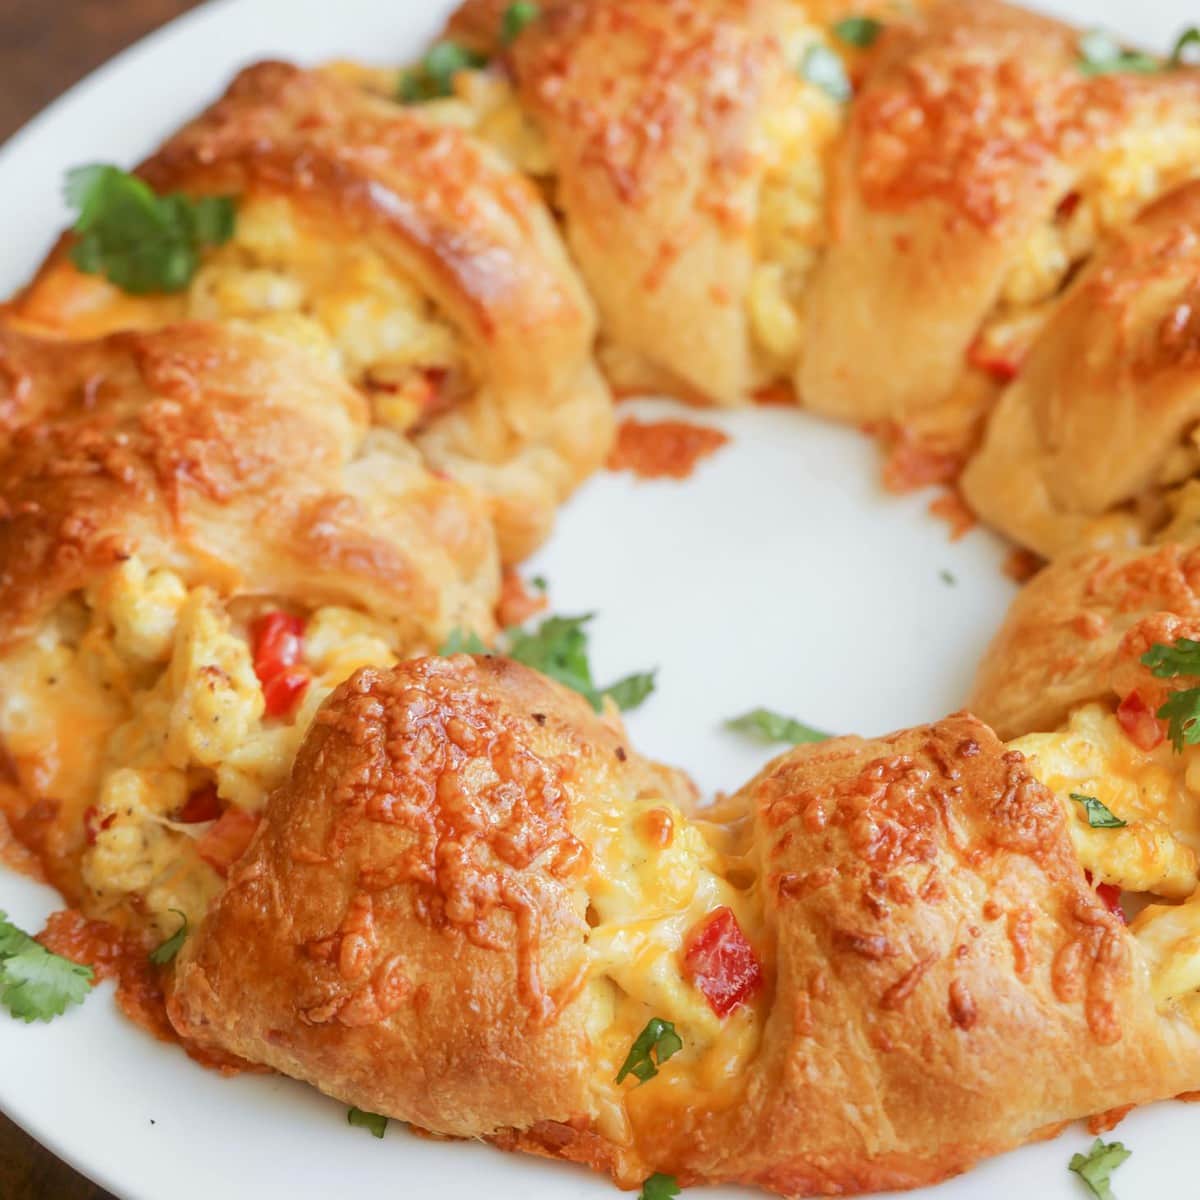 Thanksgiving breakfast ideas - a breakfast crescent ring served on a white platter.